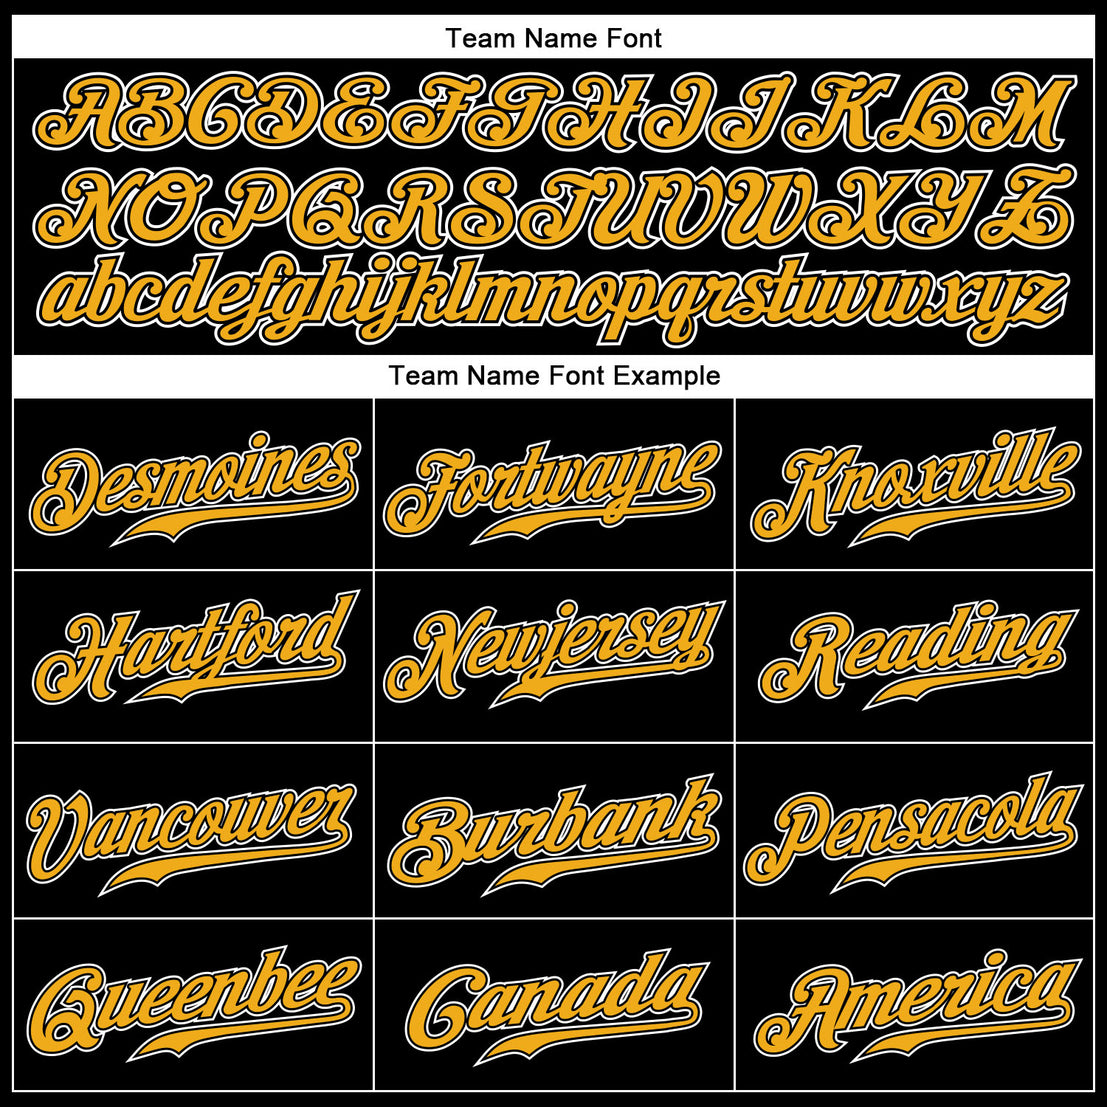 Custom Black Gold Strip Gold-White Authentic Baseball Jersey Discount